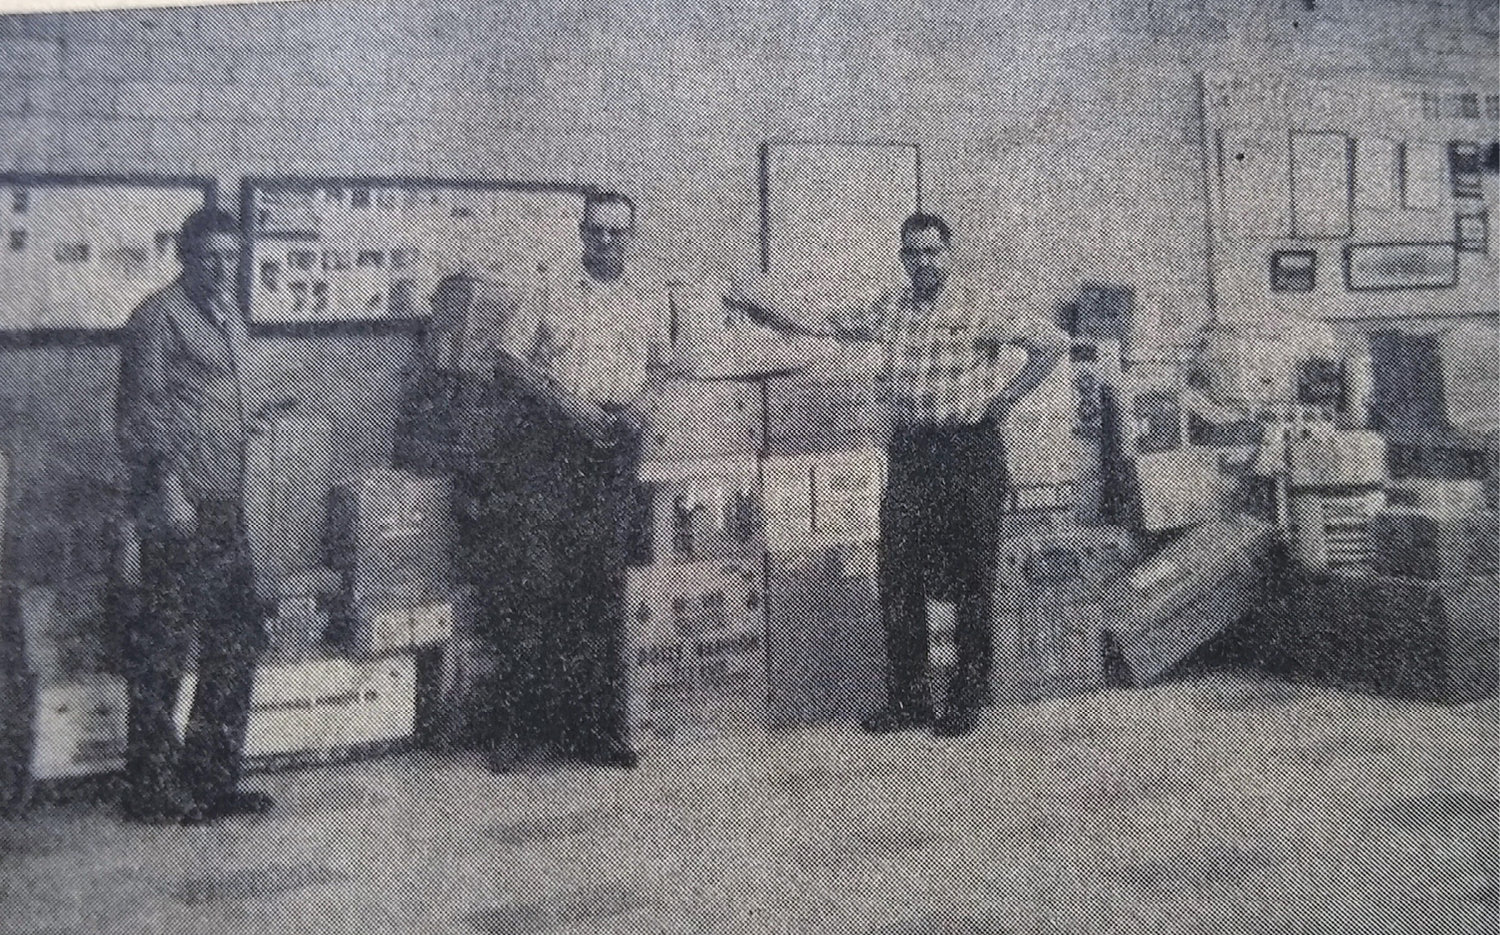 FIFTY YEARS AGO: A crew of Lake Preston American Legionnaires started a full 16-foot bed truckload of relief materials towards their destination last Thursday. The goods will be sent to the Civil Defense headquarters in Madison until they can be distributed to flood victims in Rapid City. Shown are B. J. Gottsleben, Post Commander Lynn Hasche and Merrill Thomas.